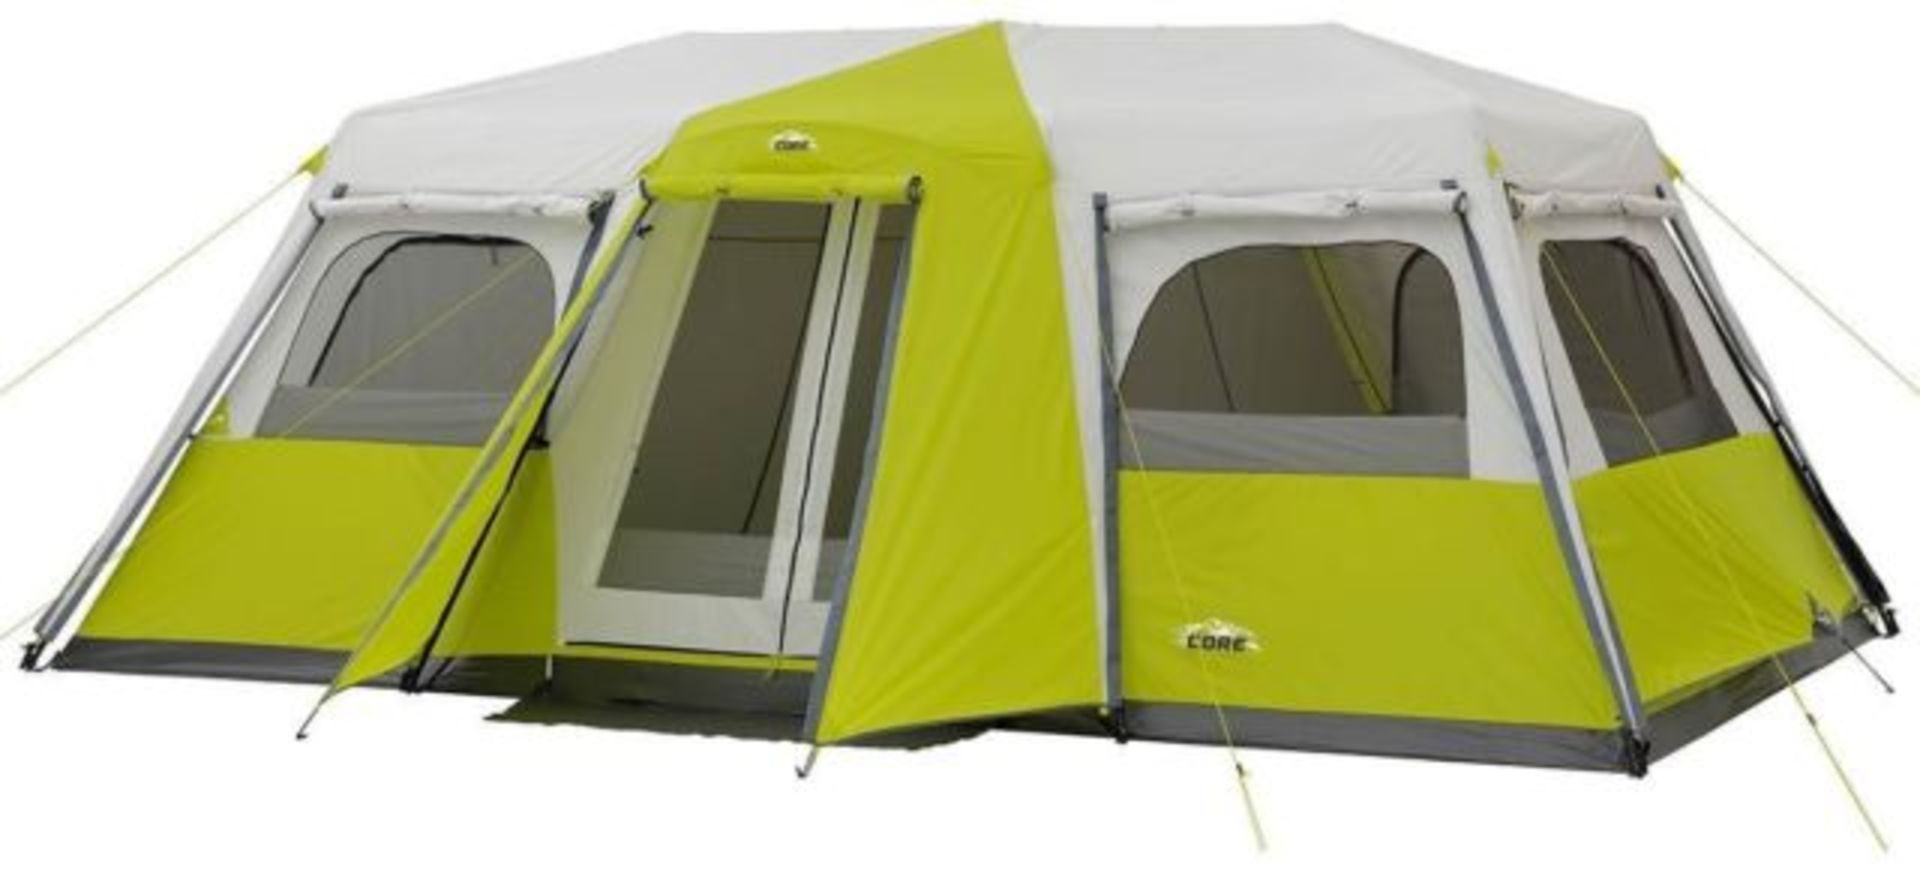 1 BOXED CAMPVALLEY CORE 12 PERSON INSTANT CABIN TENT (5.5M X 3M) WITH FULL RAINFLY RRP Â£299